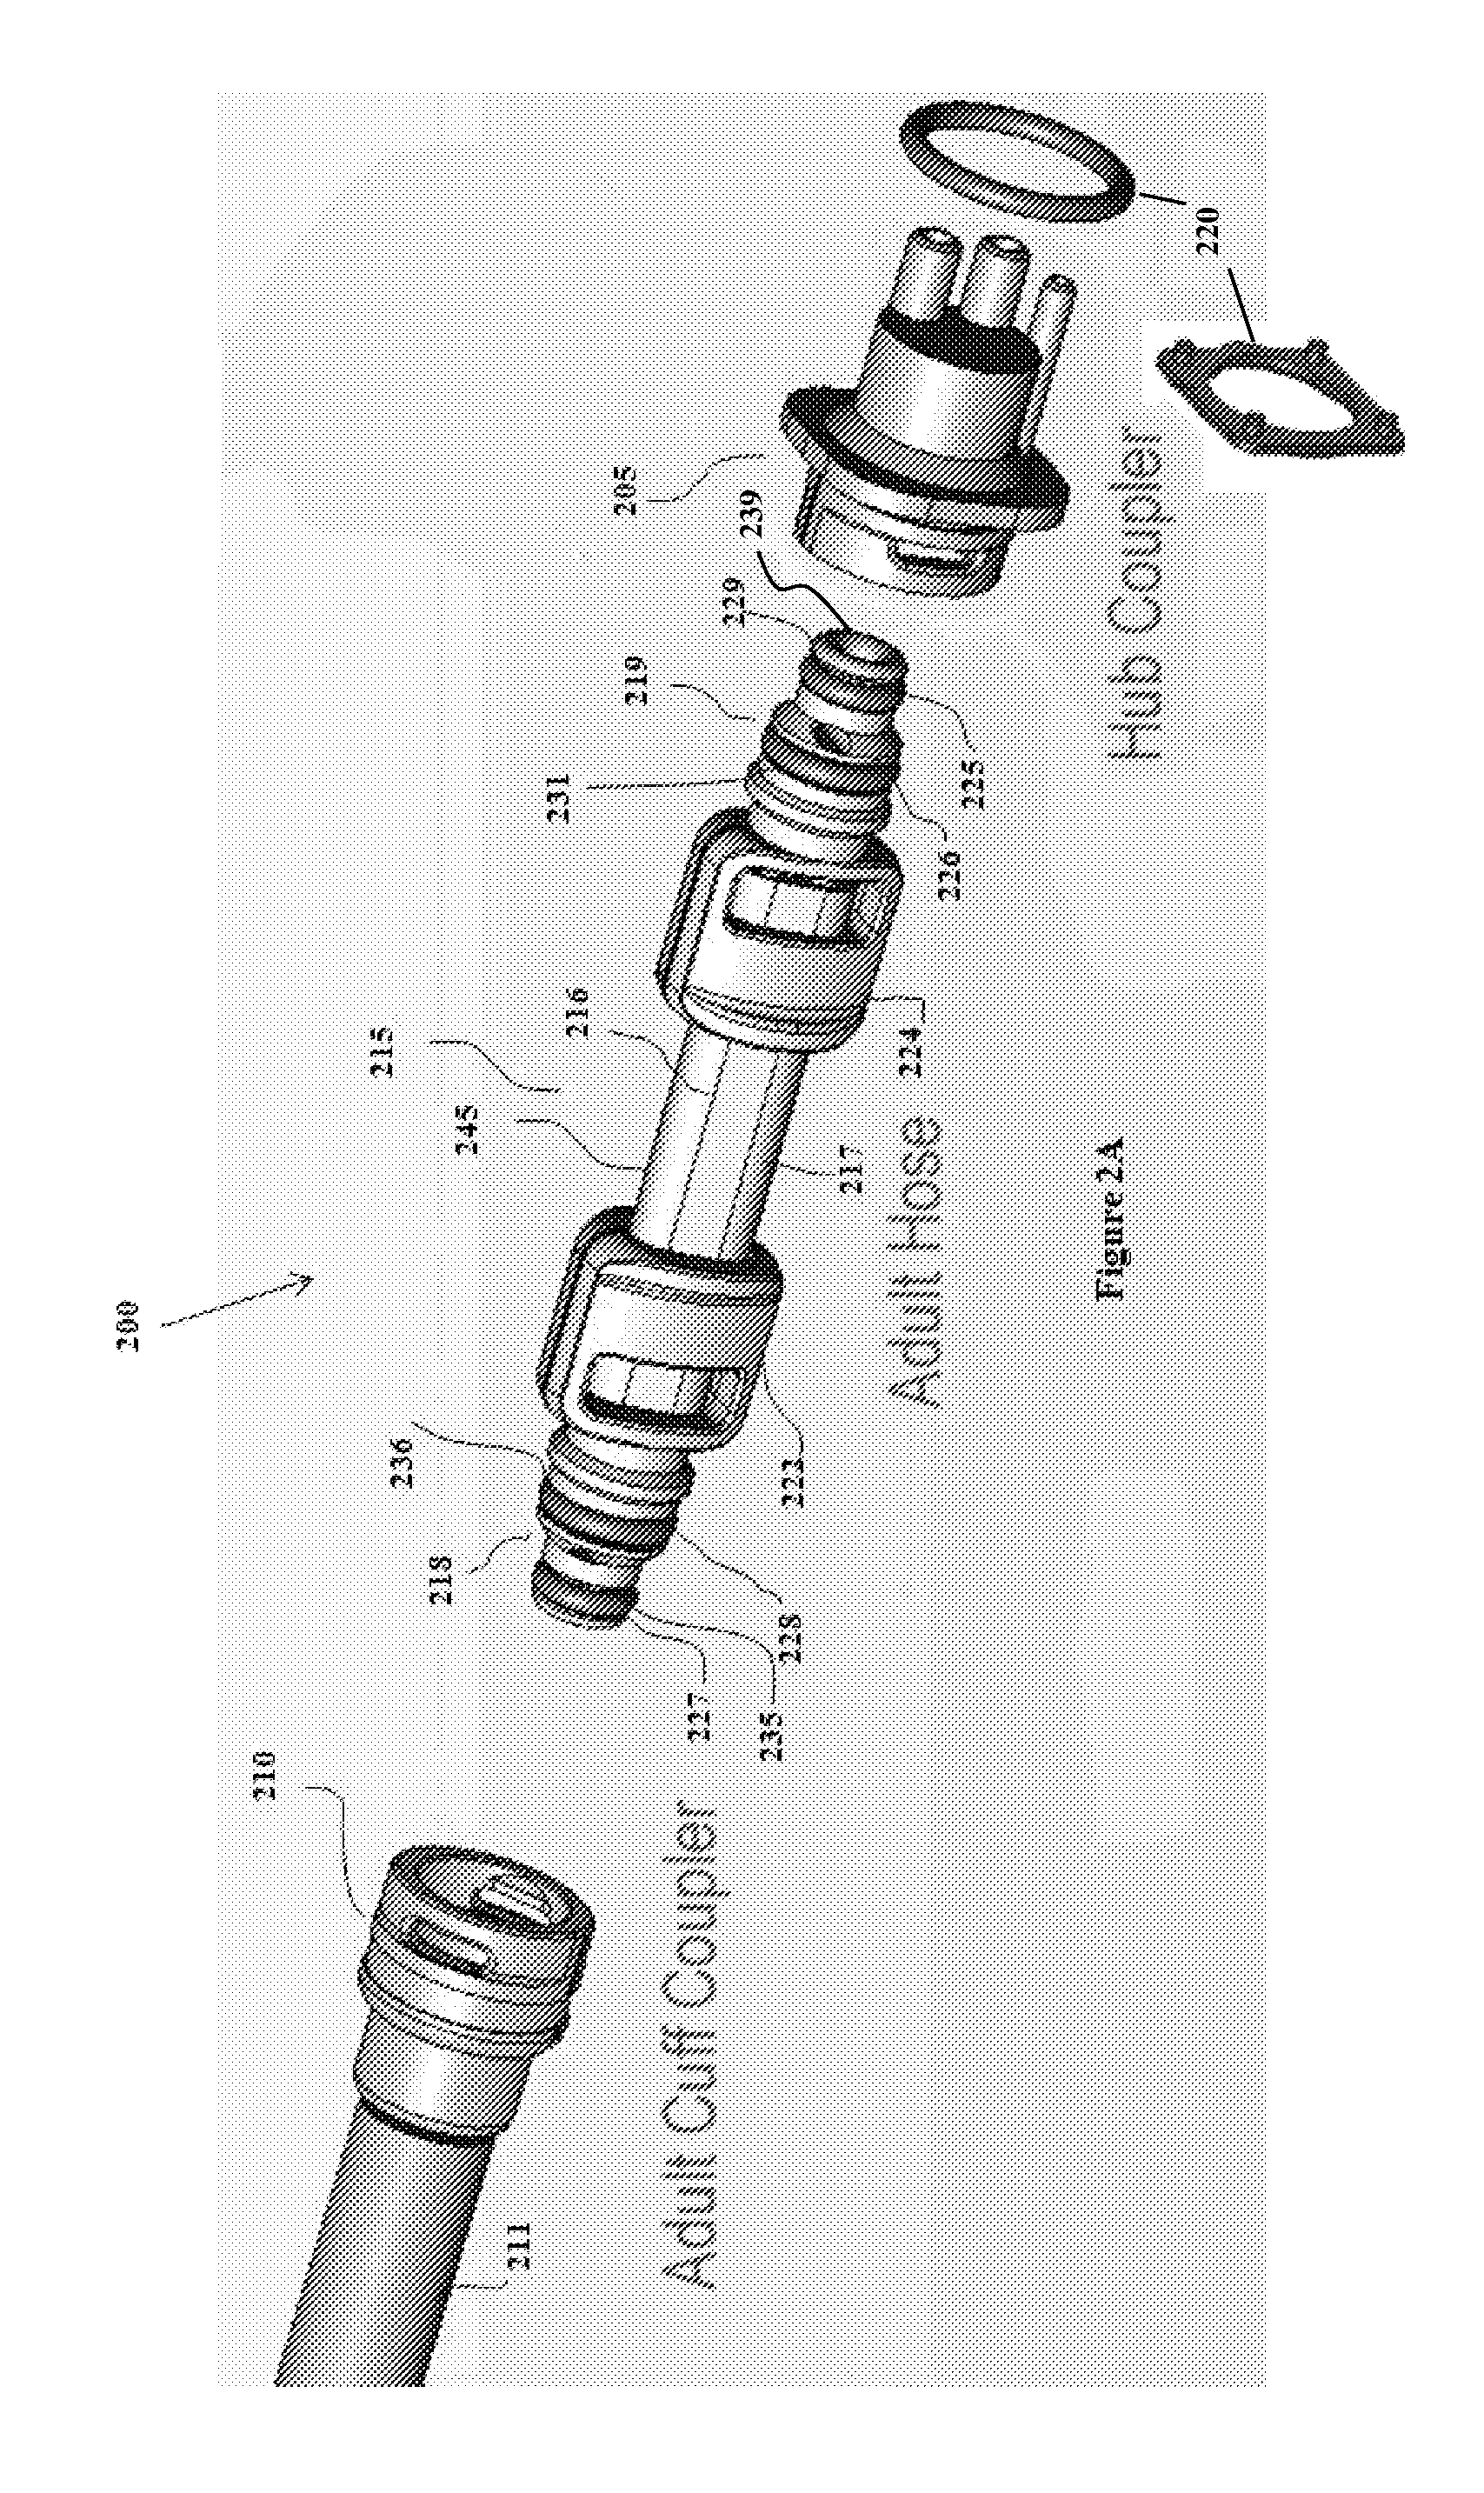 Air-Tight Push-In and Pull-Out Connector System with Positive Latching